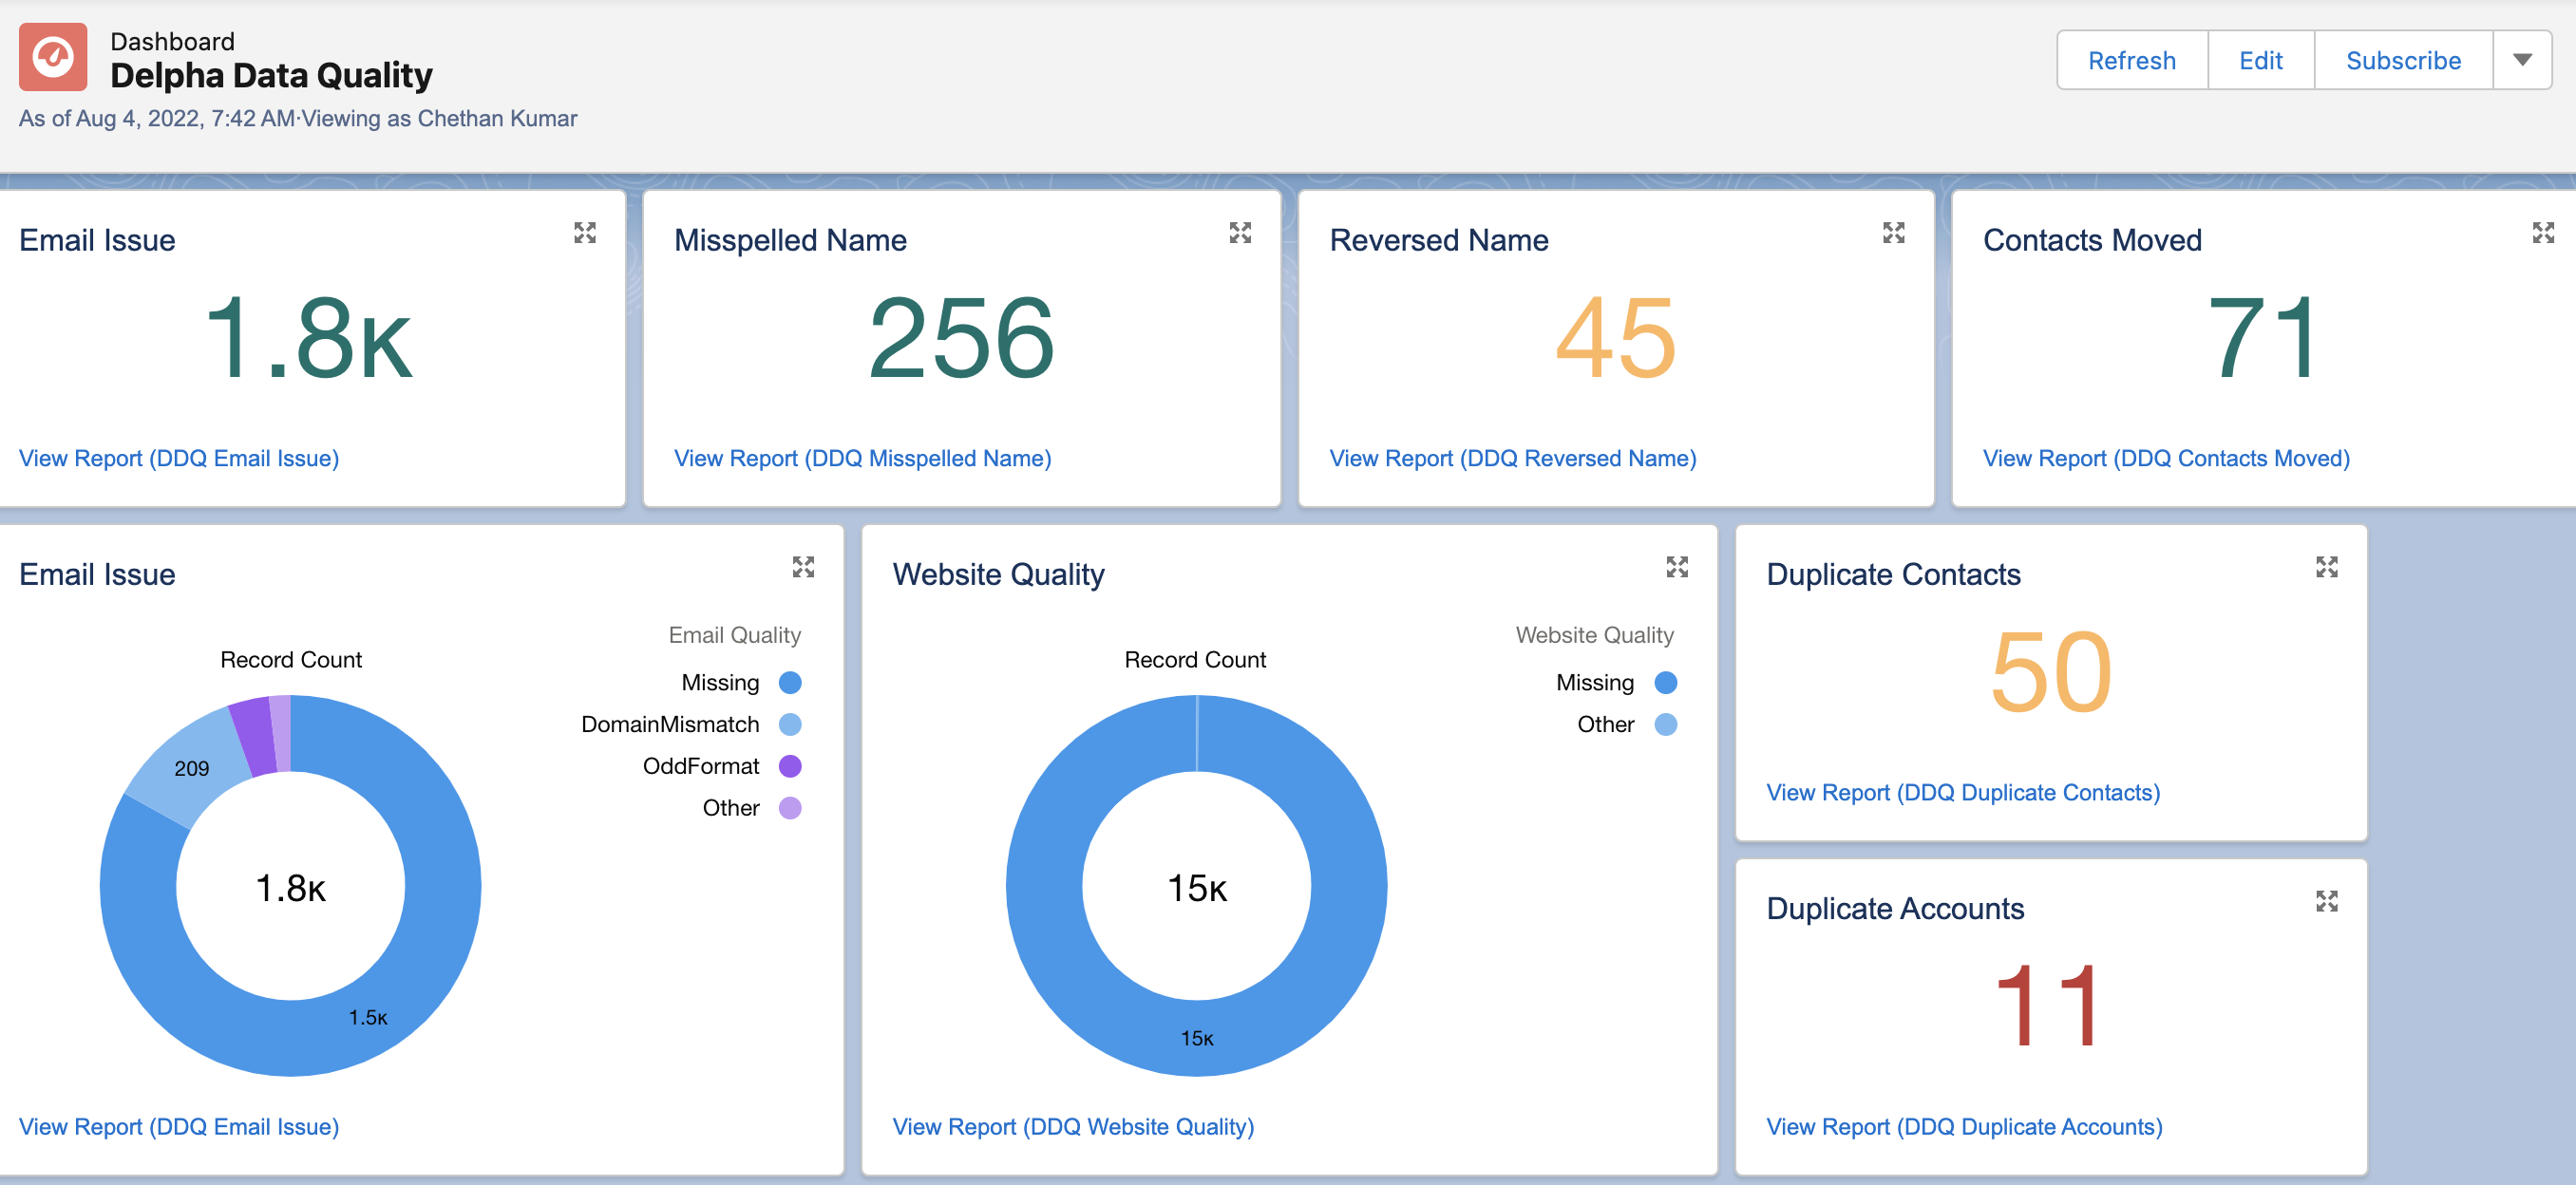 To check the data quality, Delpha recommends working from the data quality monitoring dashboard